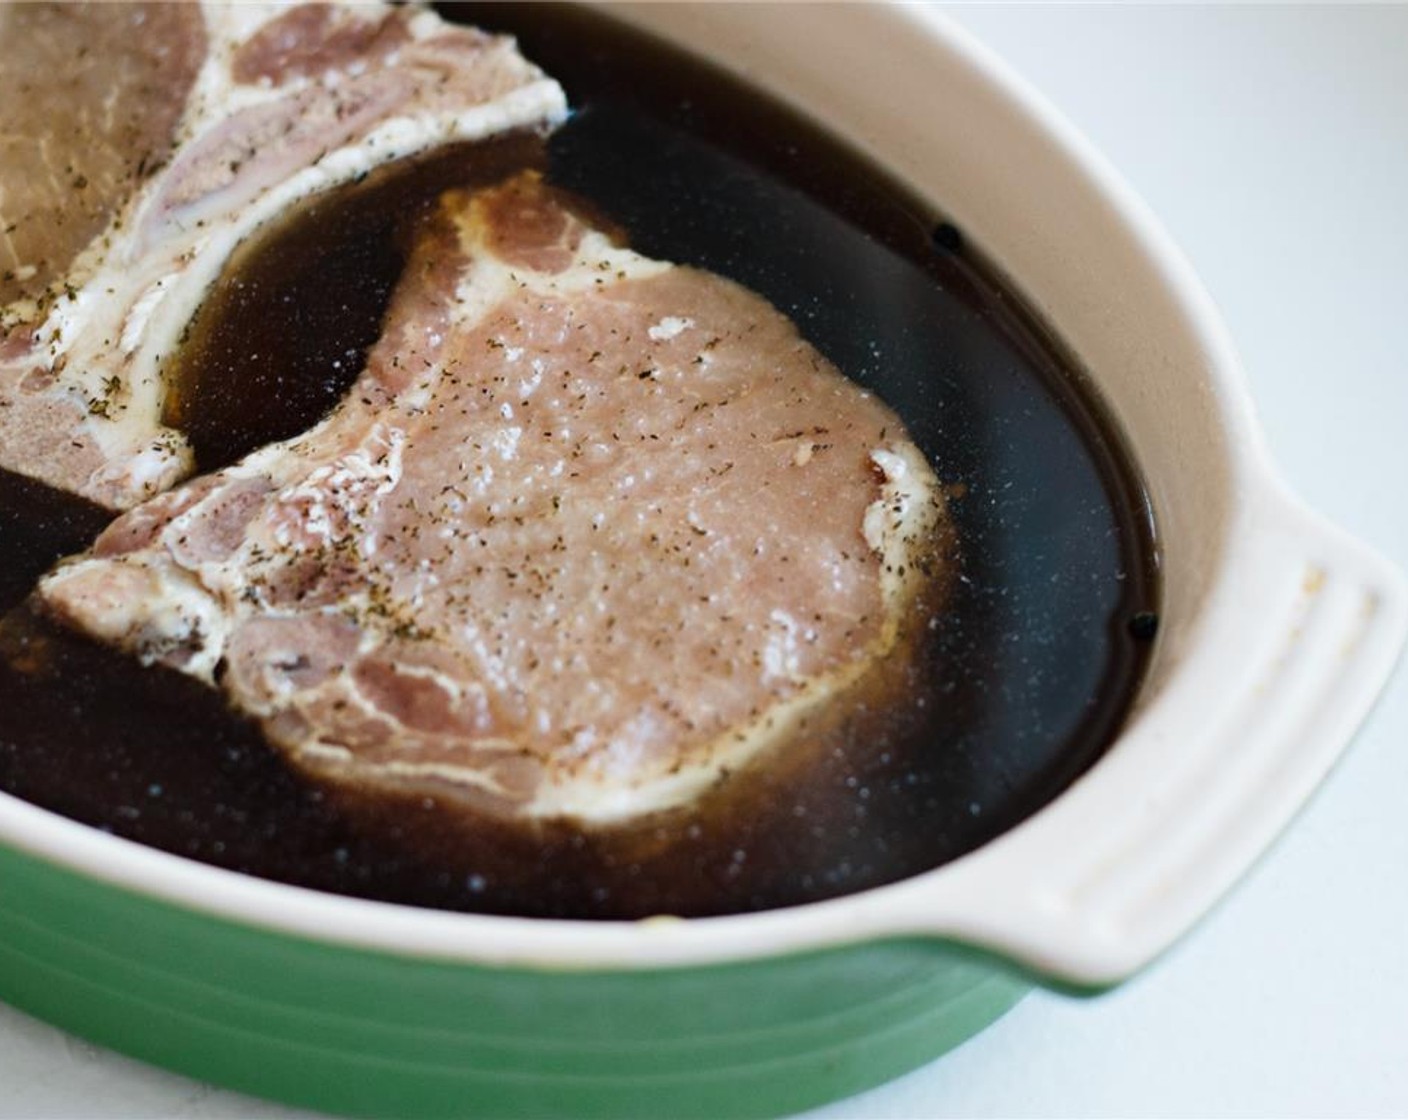 step 3 Arrange the Bone-In Pork Loin Chops (4) in a baking dish, plastic storage container, or 1-gallon plastic bag so that they fit snugly; pour the maple brine over them to cover completely. Cover and refrigerate for at least 24 hours and ideally up to 48 hours.